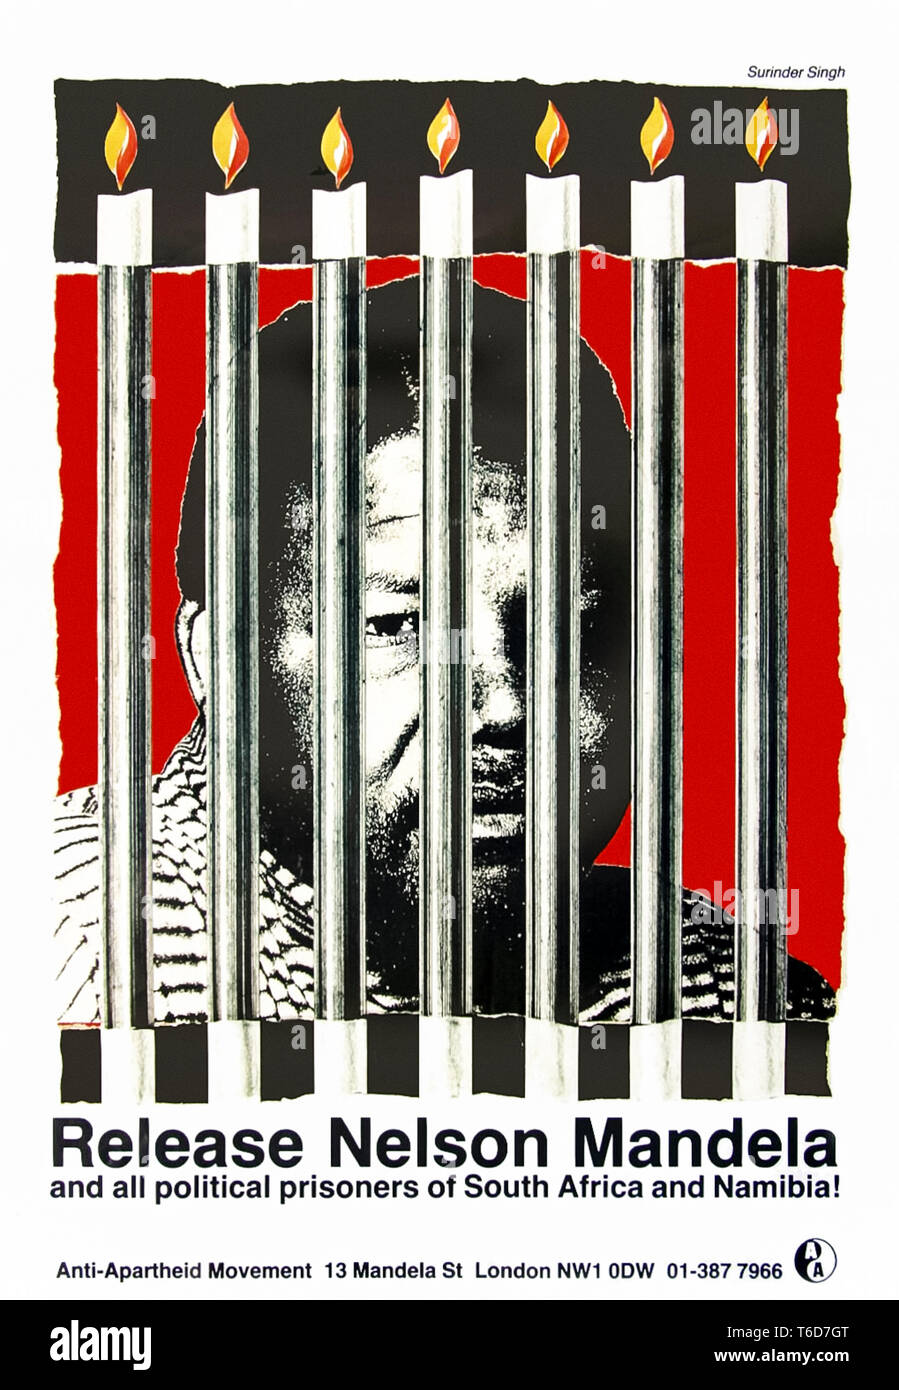 “Release Nelson Mandela and all political prisoners of South Africa and Namibia!” 1988 campaign poster produced by the British Anti-Apartheid Movement and designed by Surinder Singh. Stock Photo